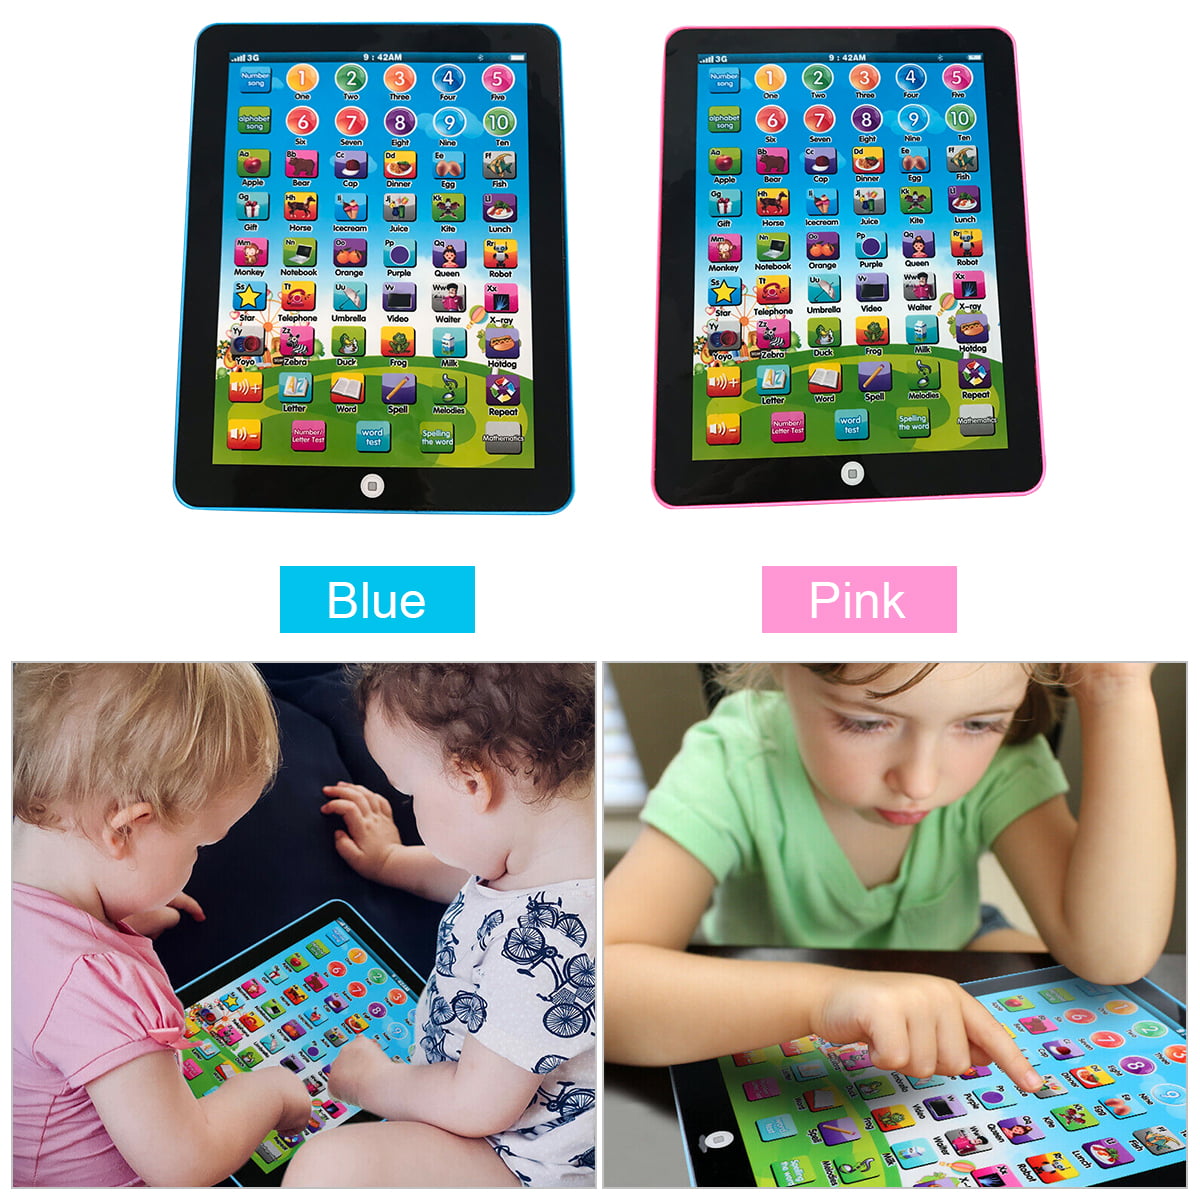 Educational Toys For 1-6 Year Olds Toddlers Baby Kids Boy Girl Learning Tablet 